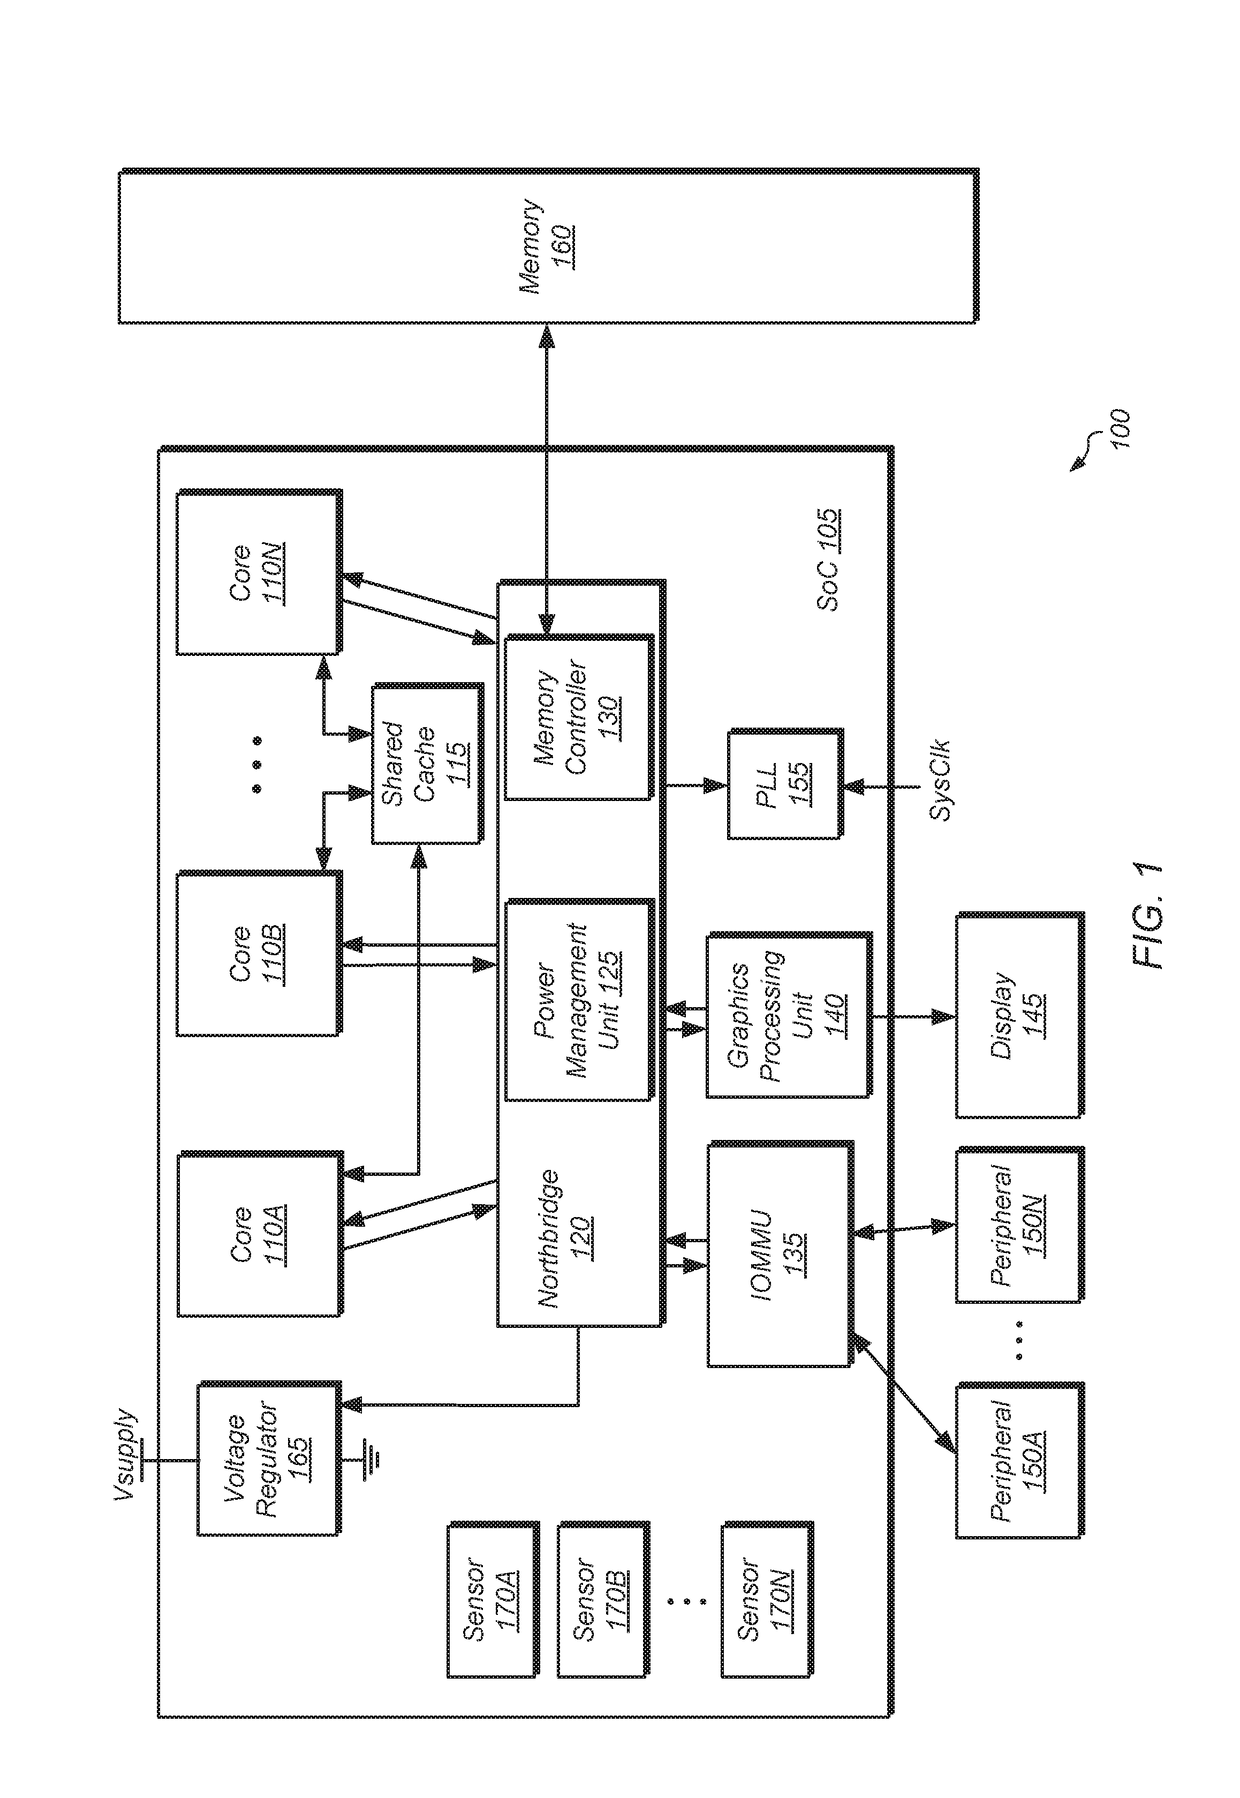 Temperature-aware task scheduling and proactive power management